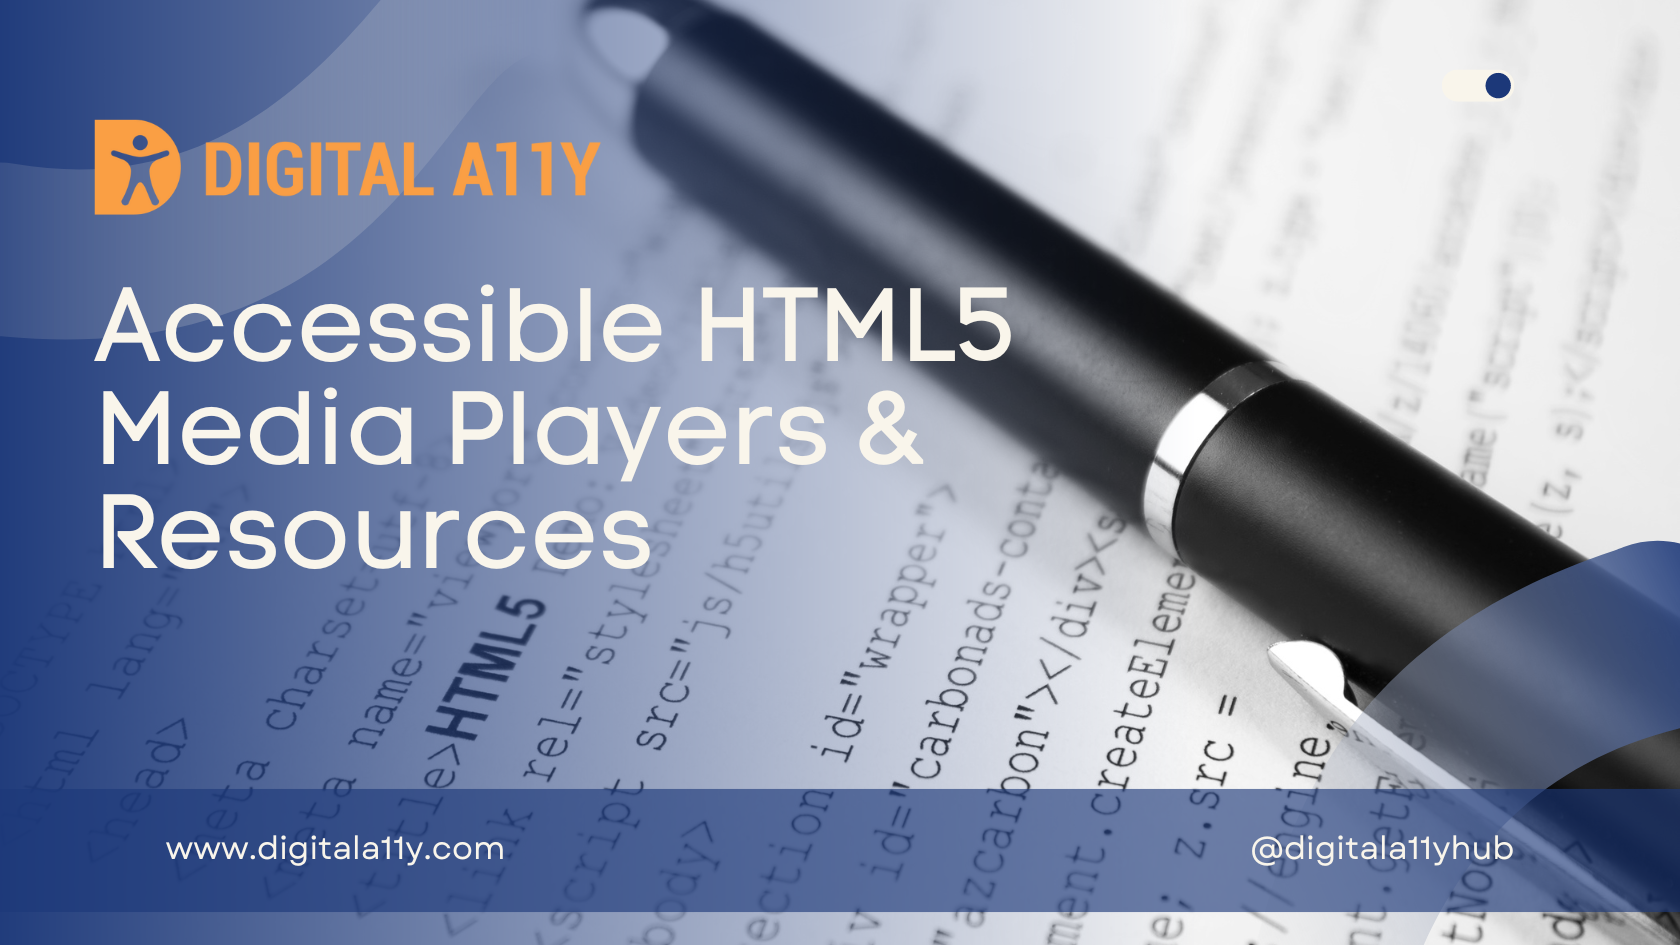 Accessible HTML5 Media Players & Resources